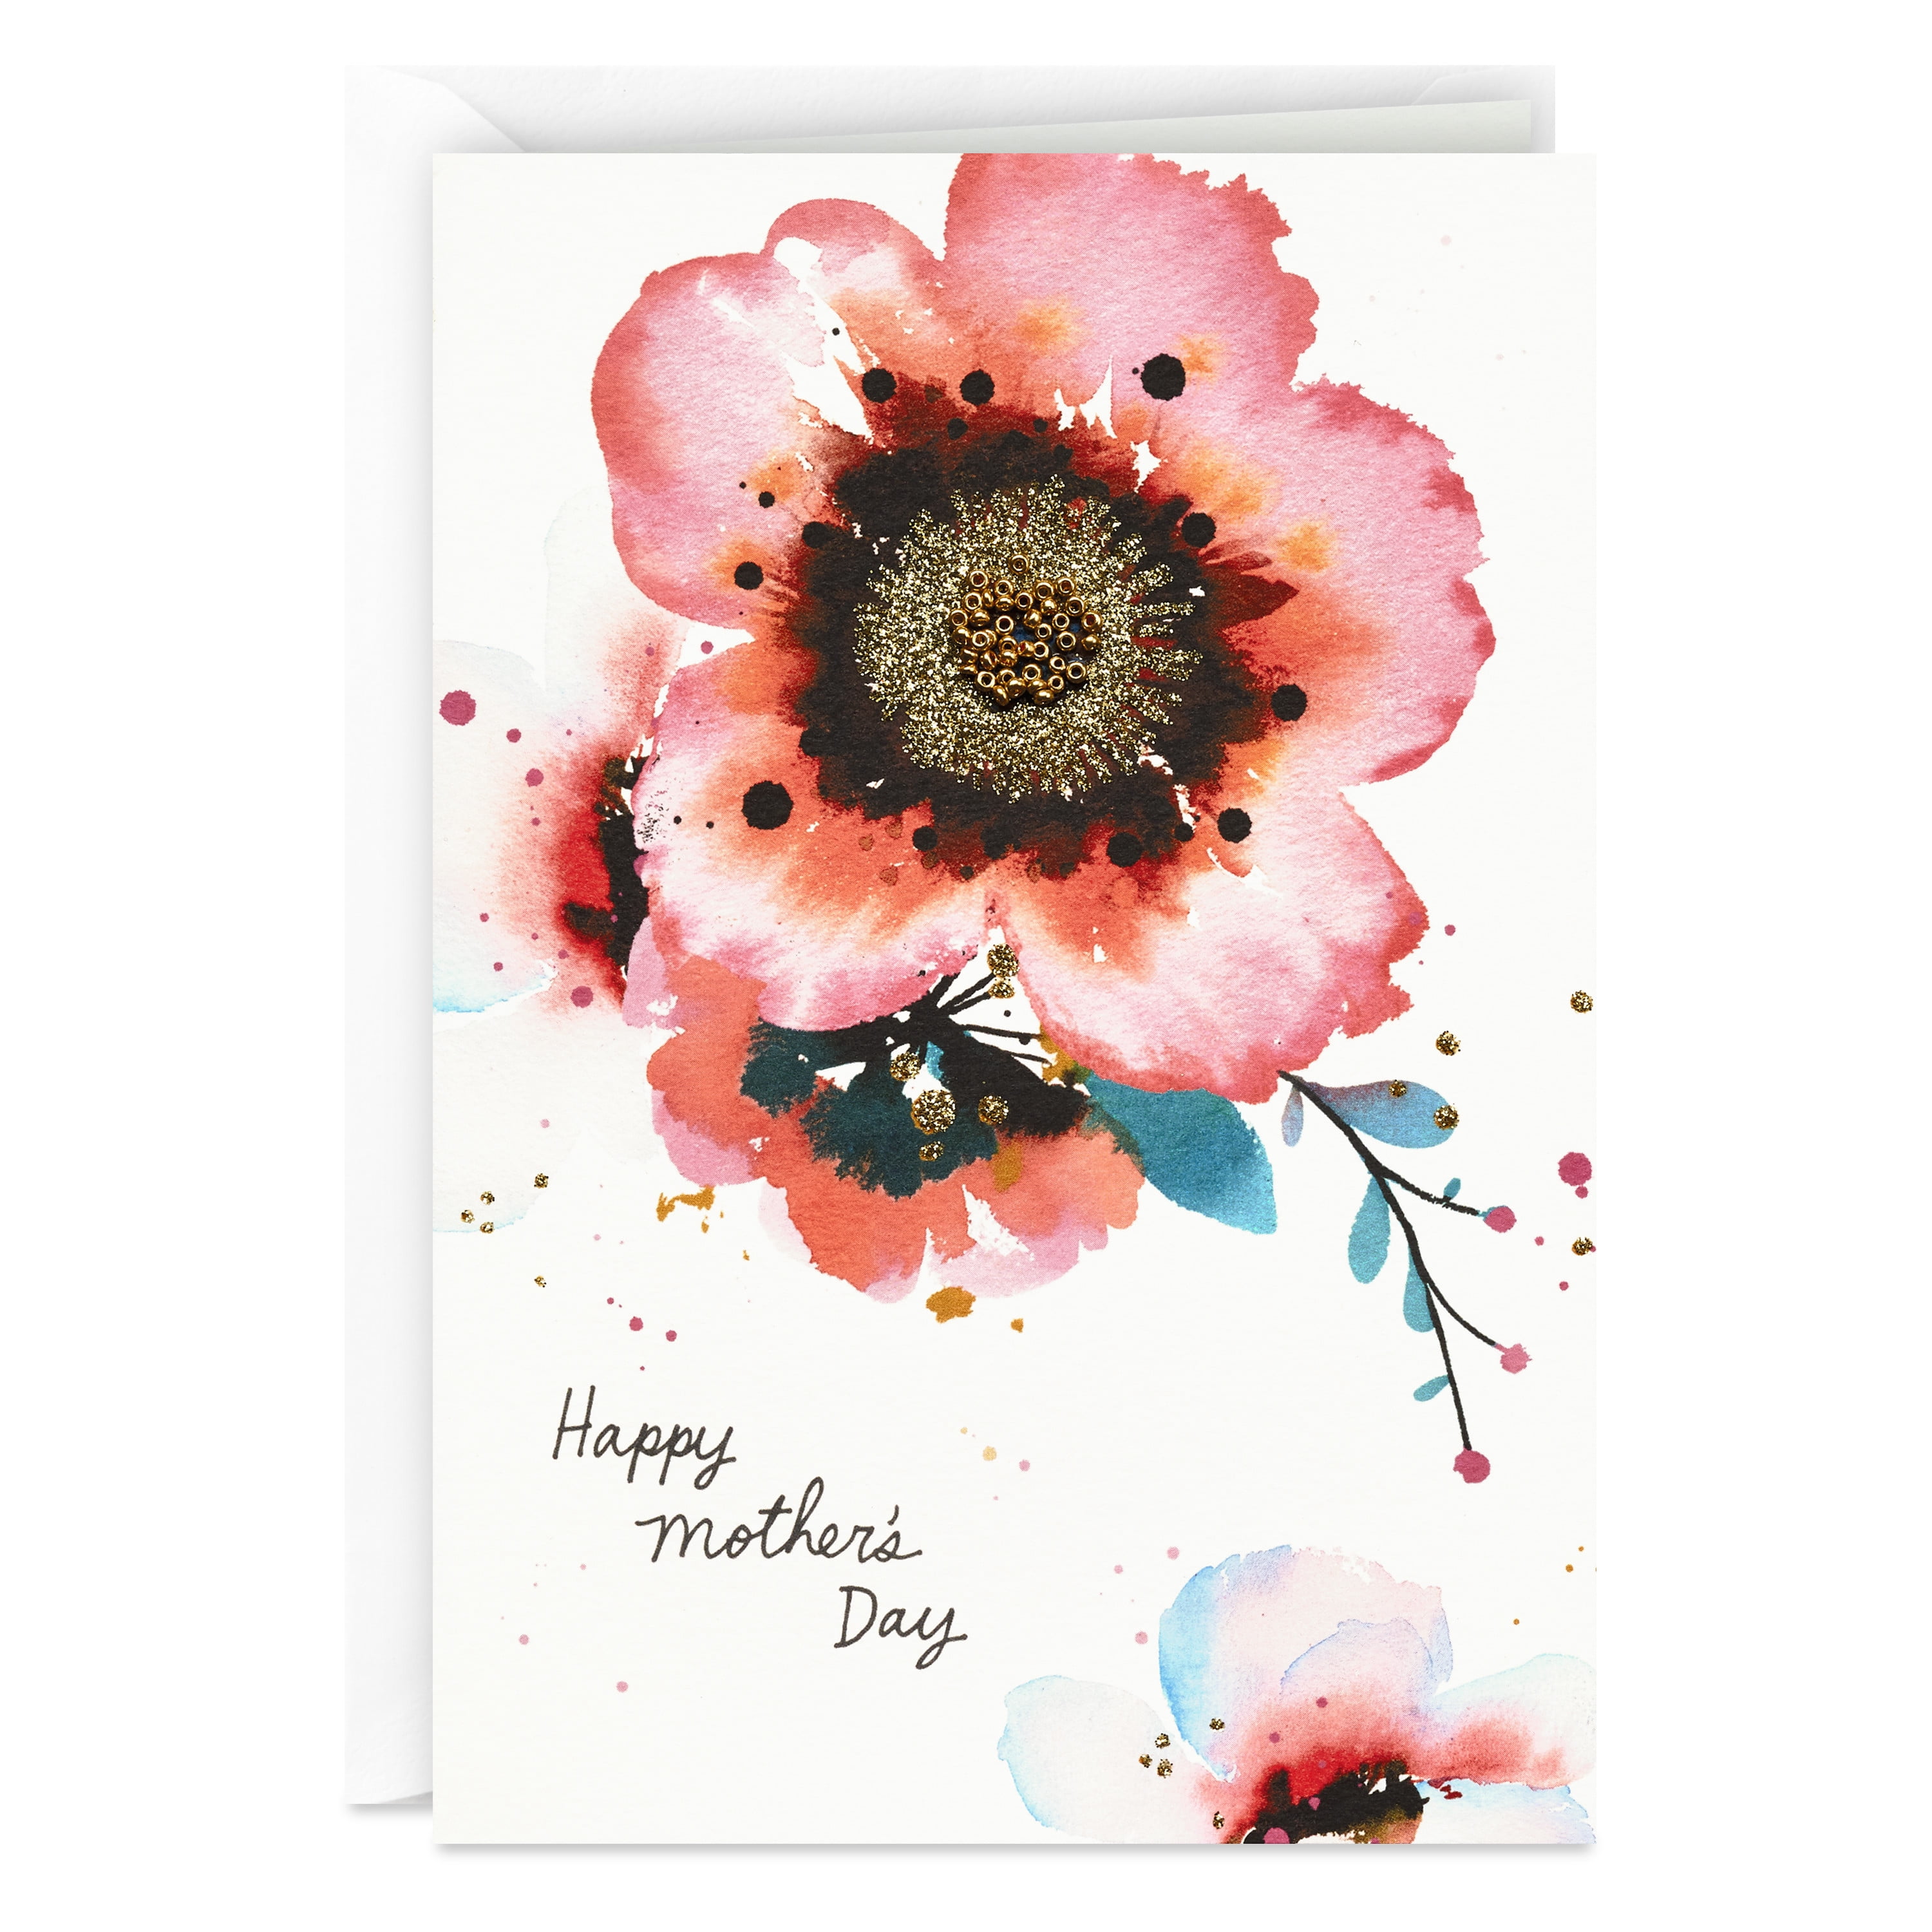 Details about   HALLMARK  For Wife Flowers GLITTERED Large Birthday Greeting Card W/ TRACKING 